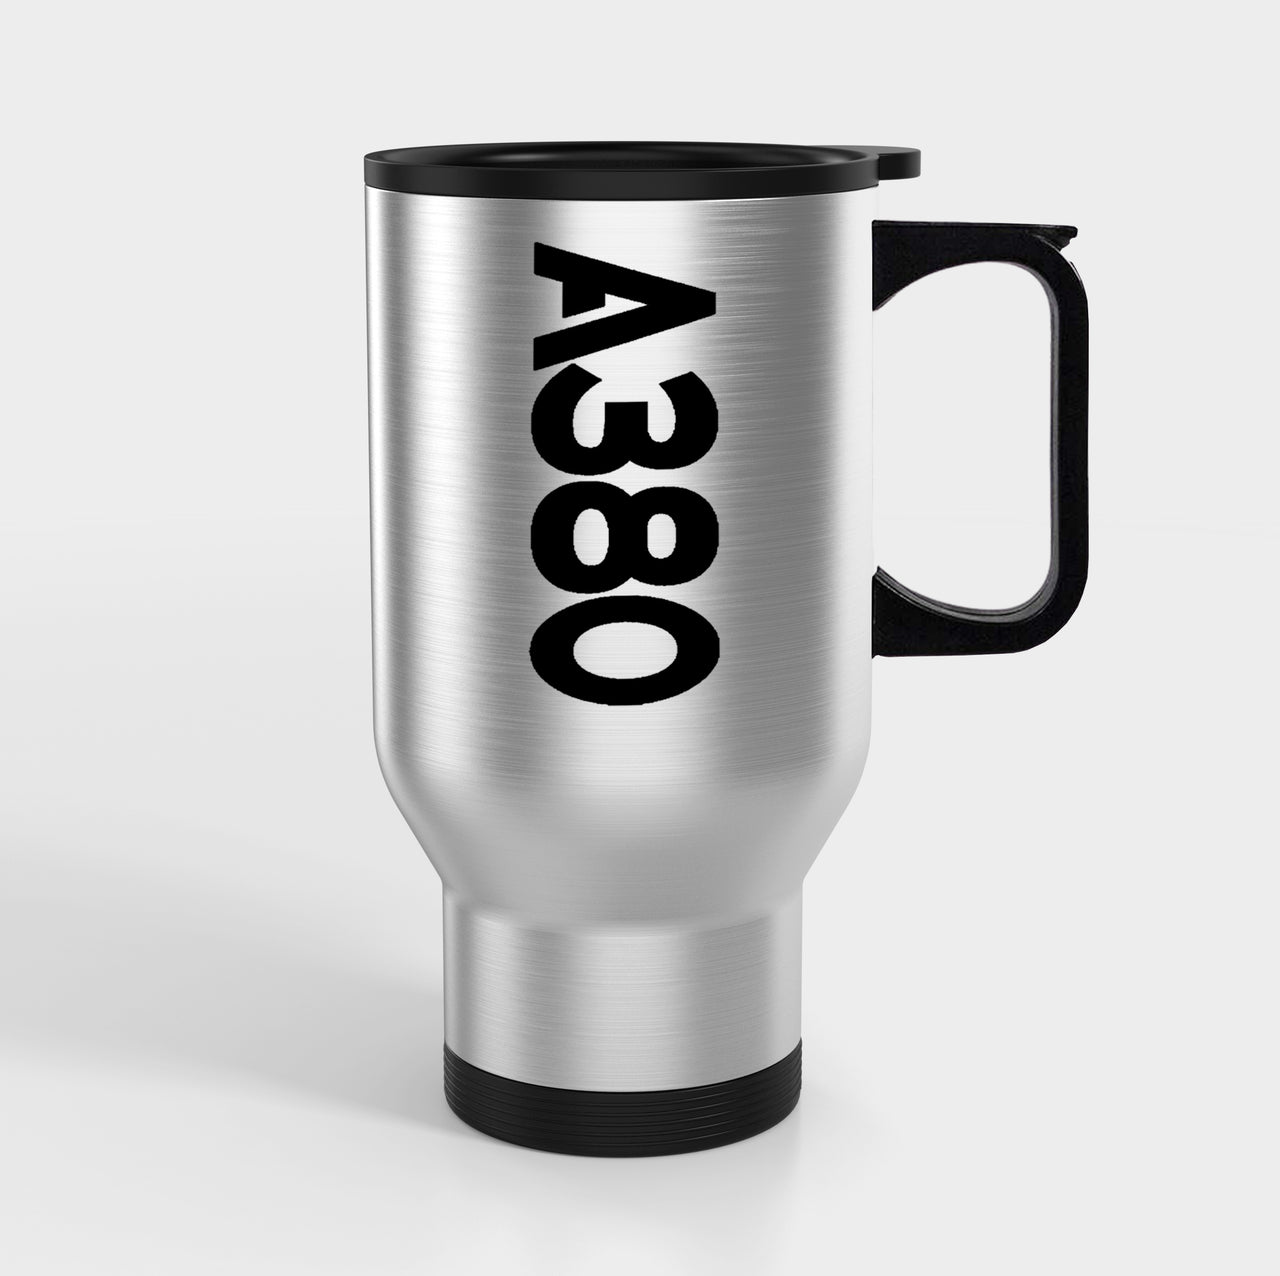 A380 Text Side Designed Travel Mugs (With Holder)